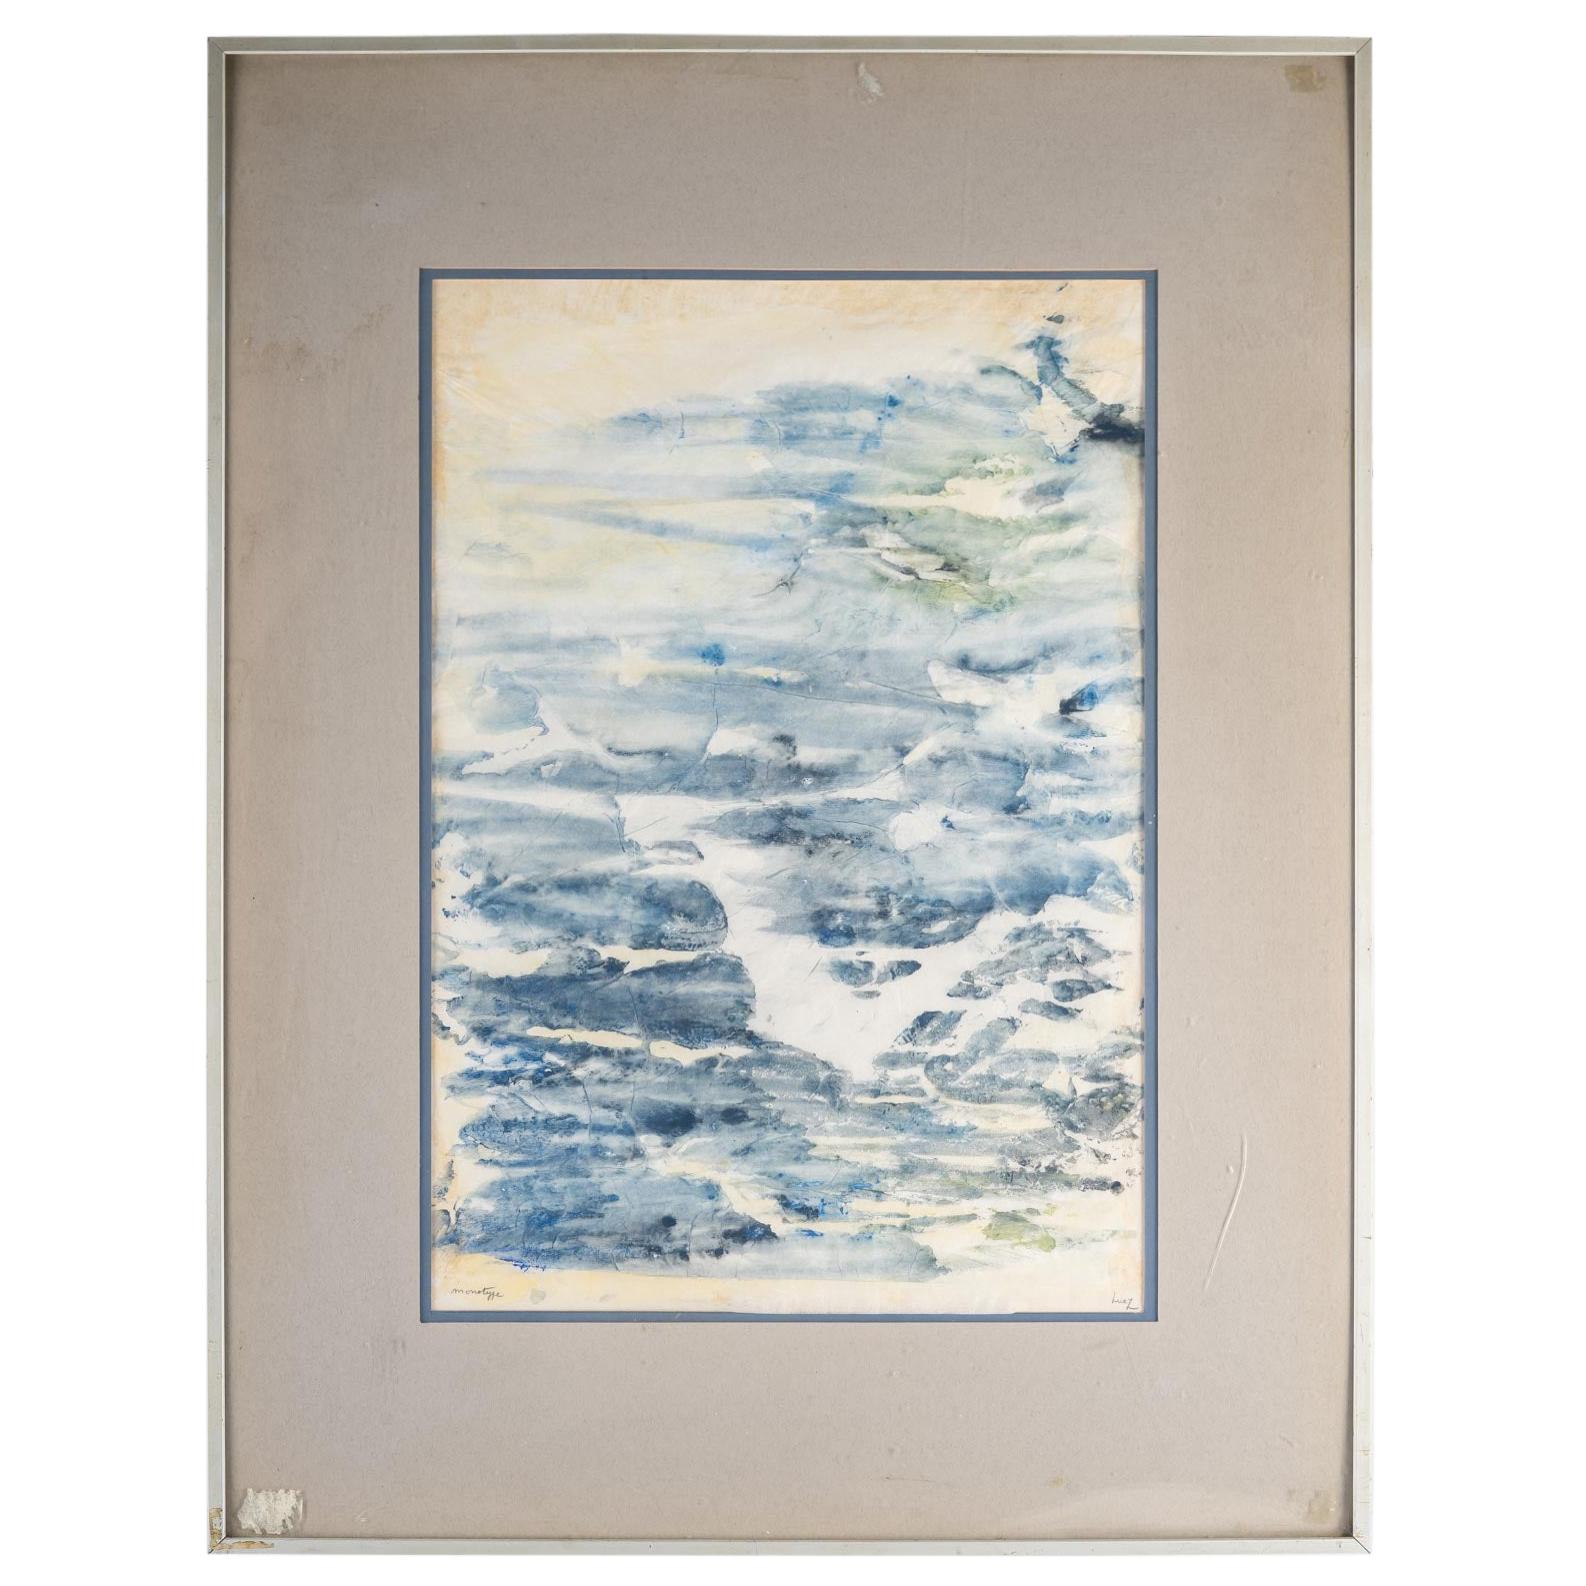 Monotype by Luez, Framed Under Glass